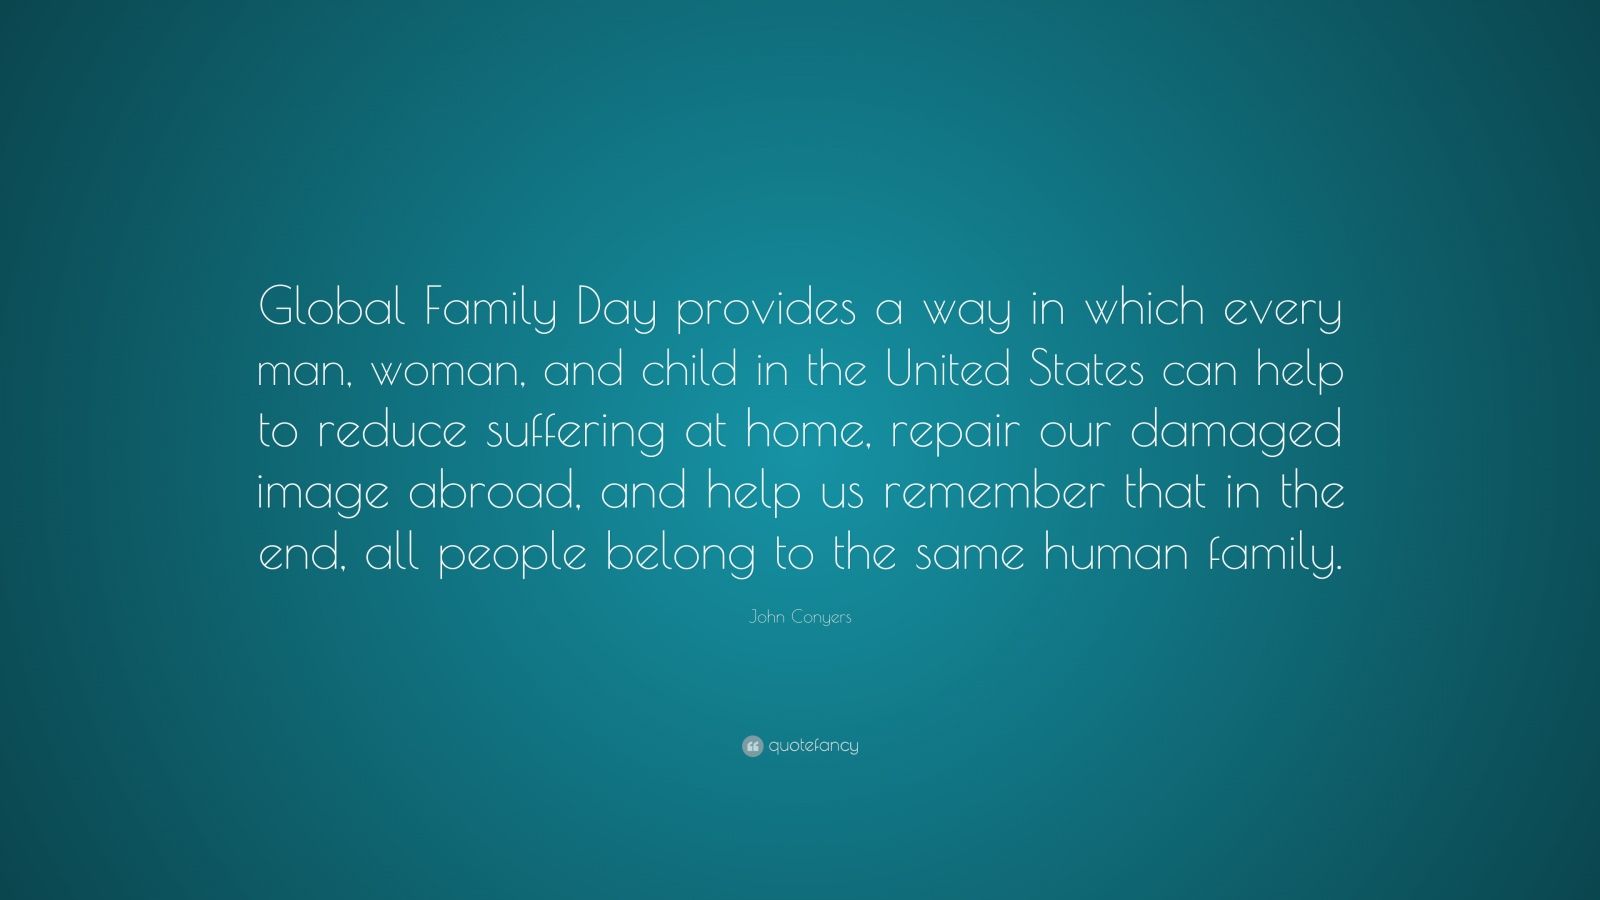 global family day provides a way in which every man, woman and child in the united states can help to reduce suffering at home